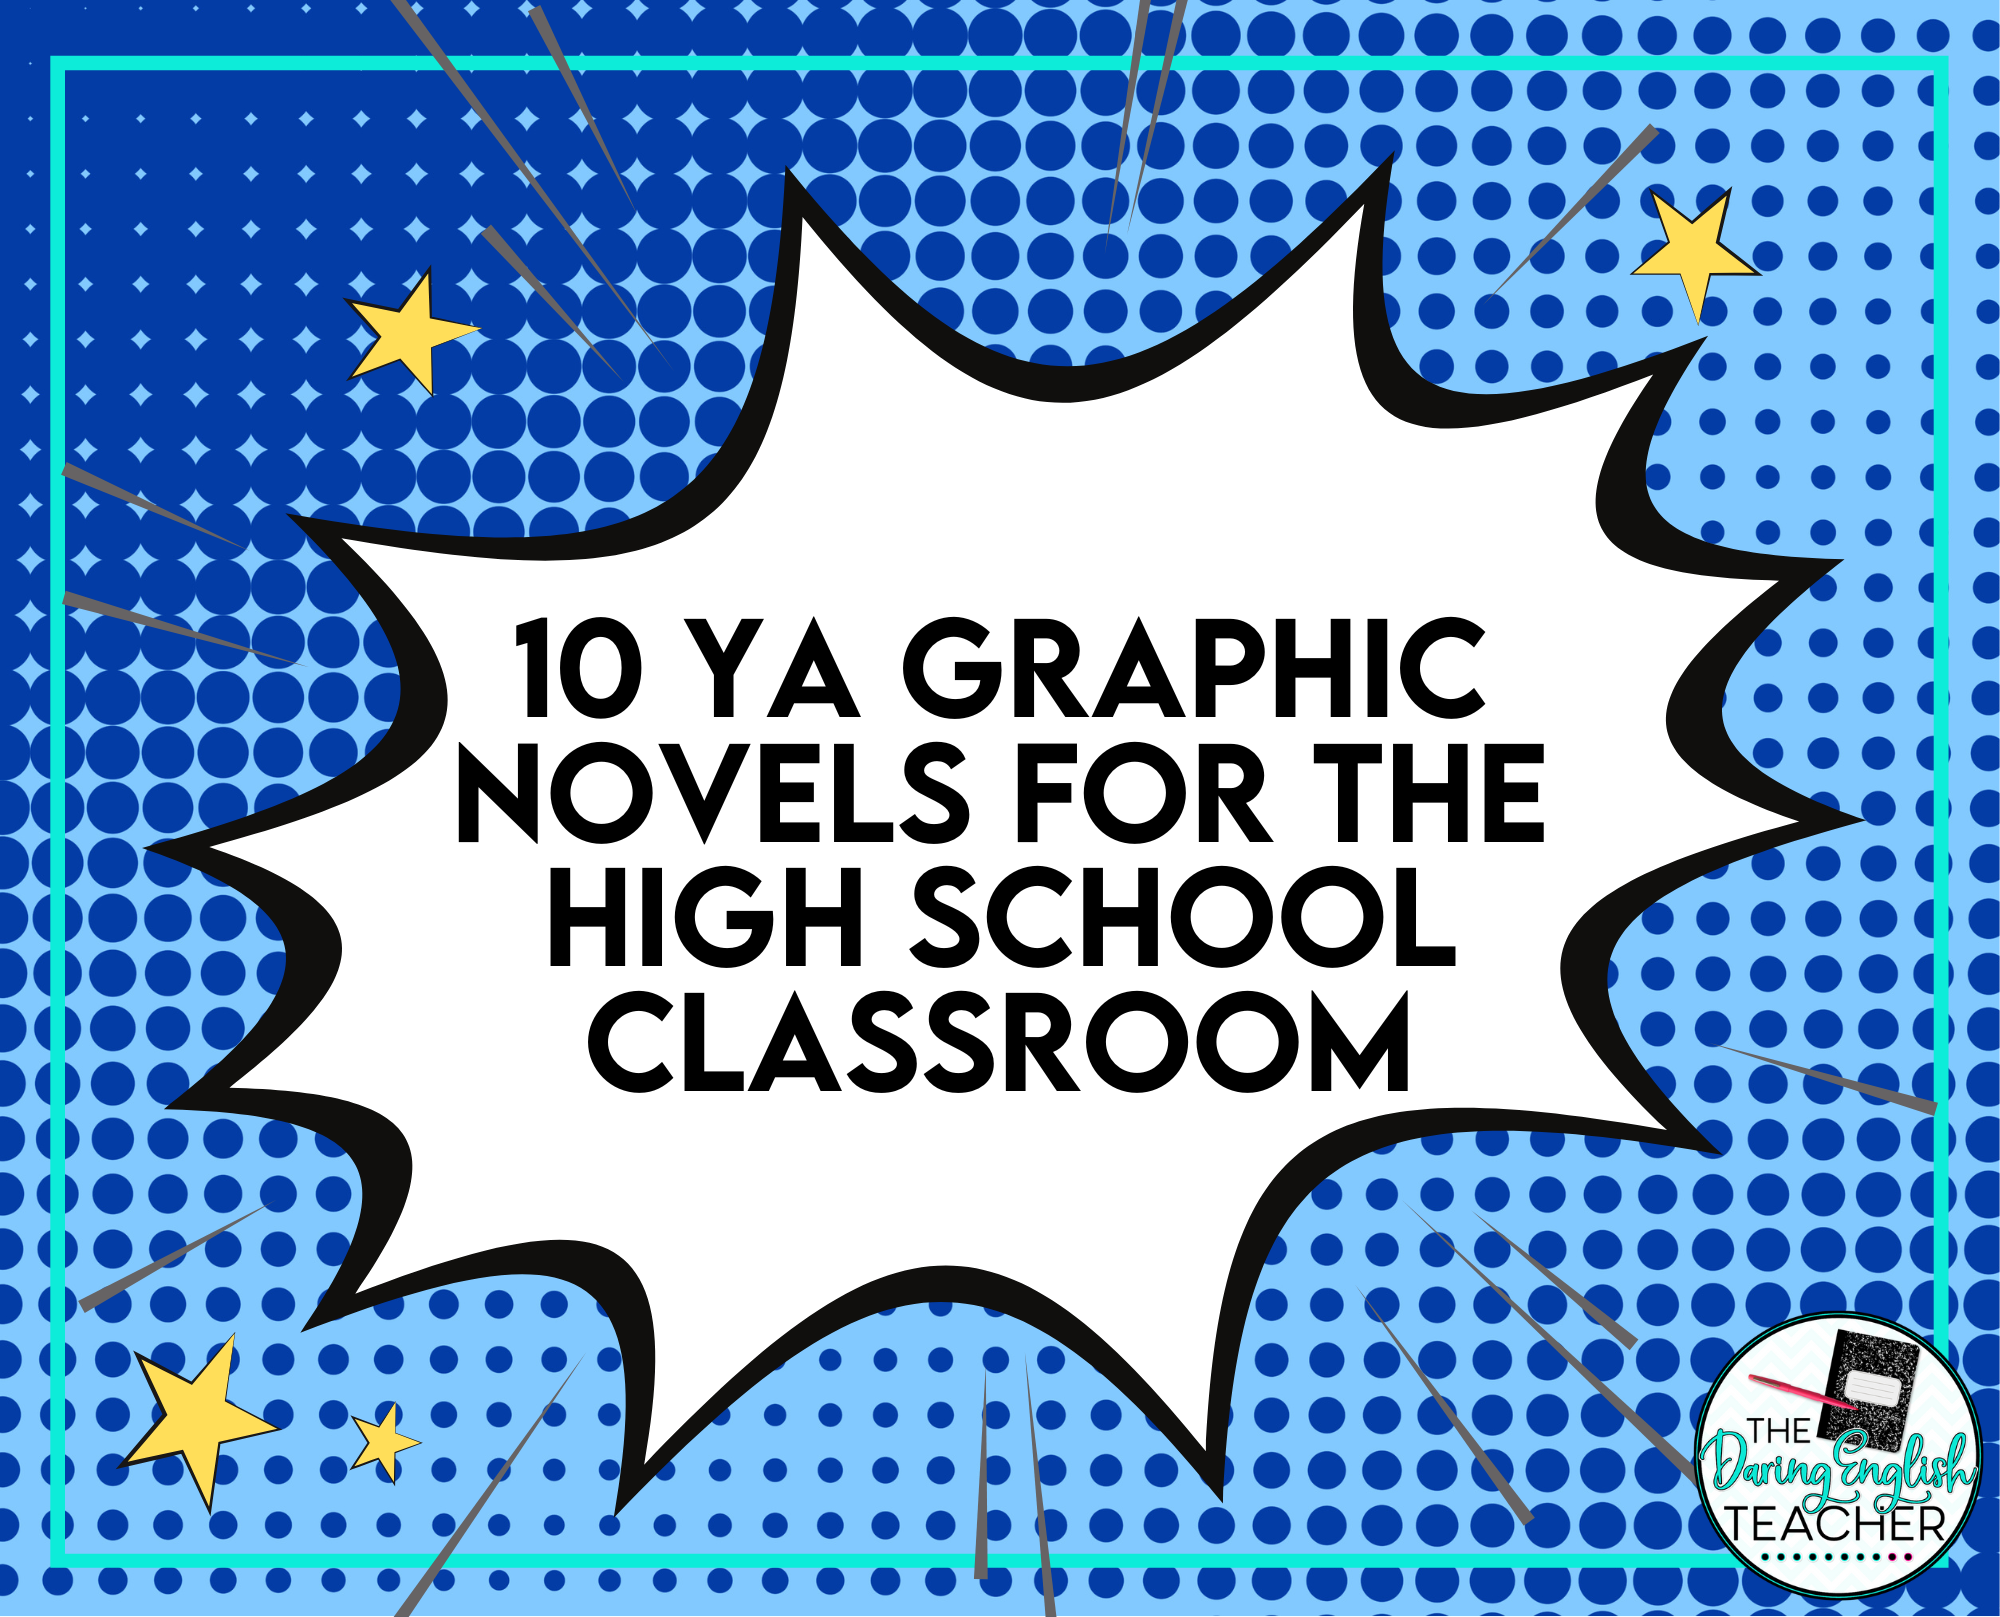 10 YA Graphic Novels to Include in Your Classroom